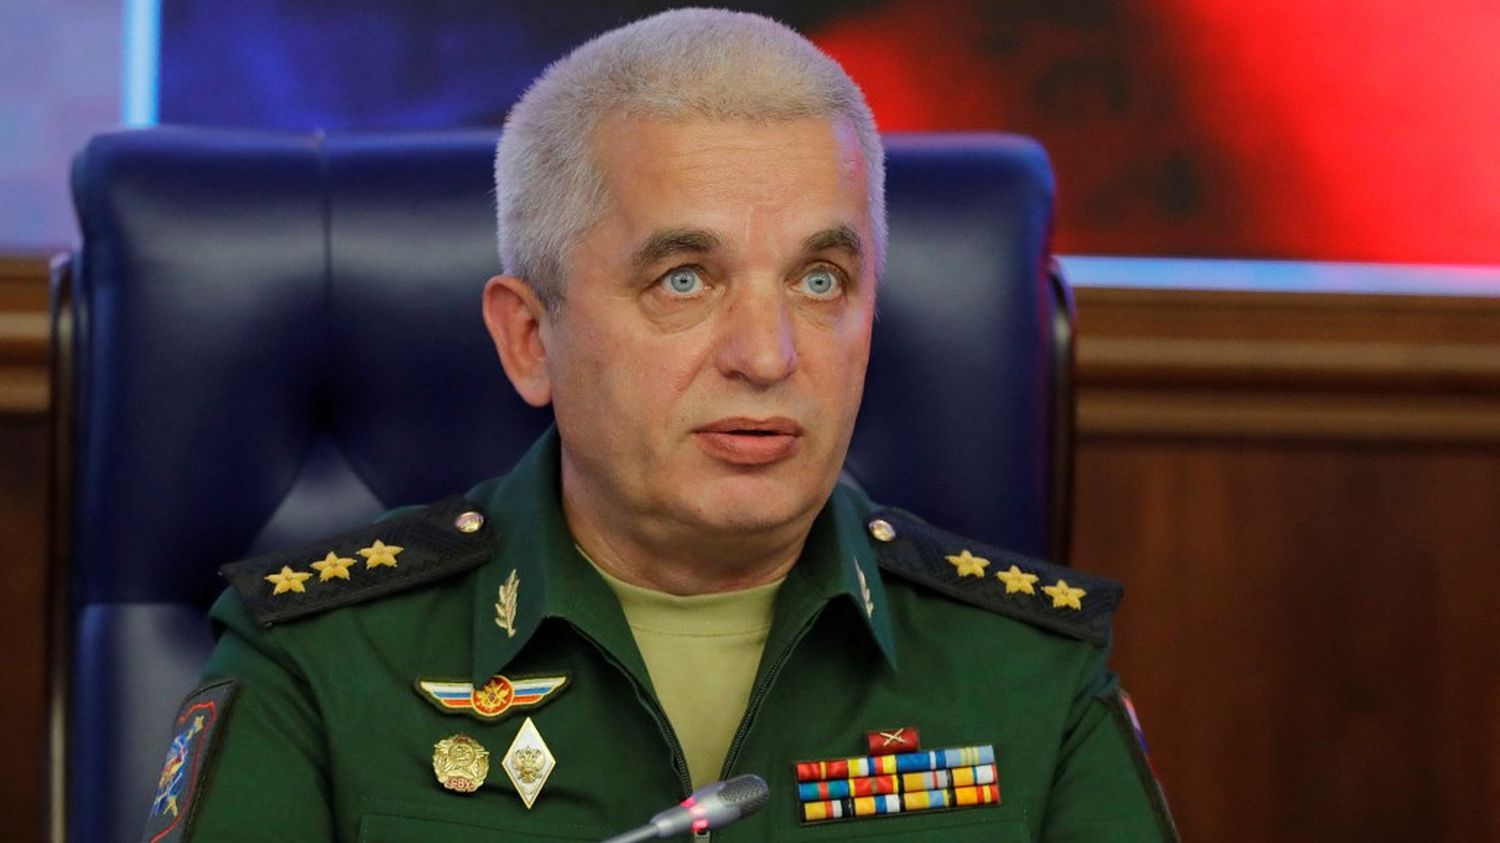 War in Ukraine: in full mobilization, Russia replaces its general in charge of logistics
